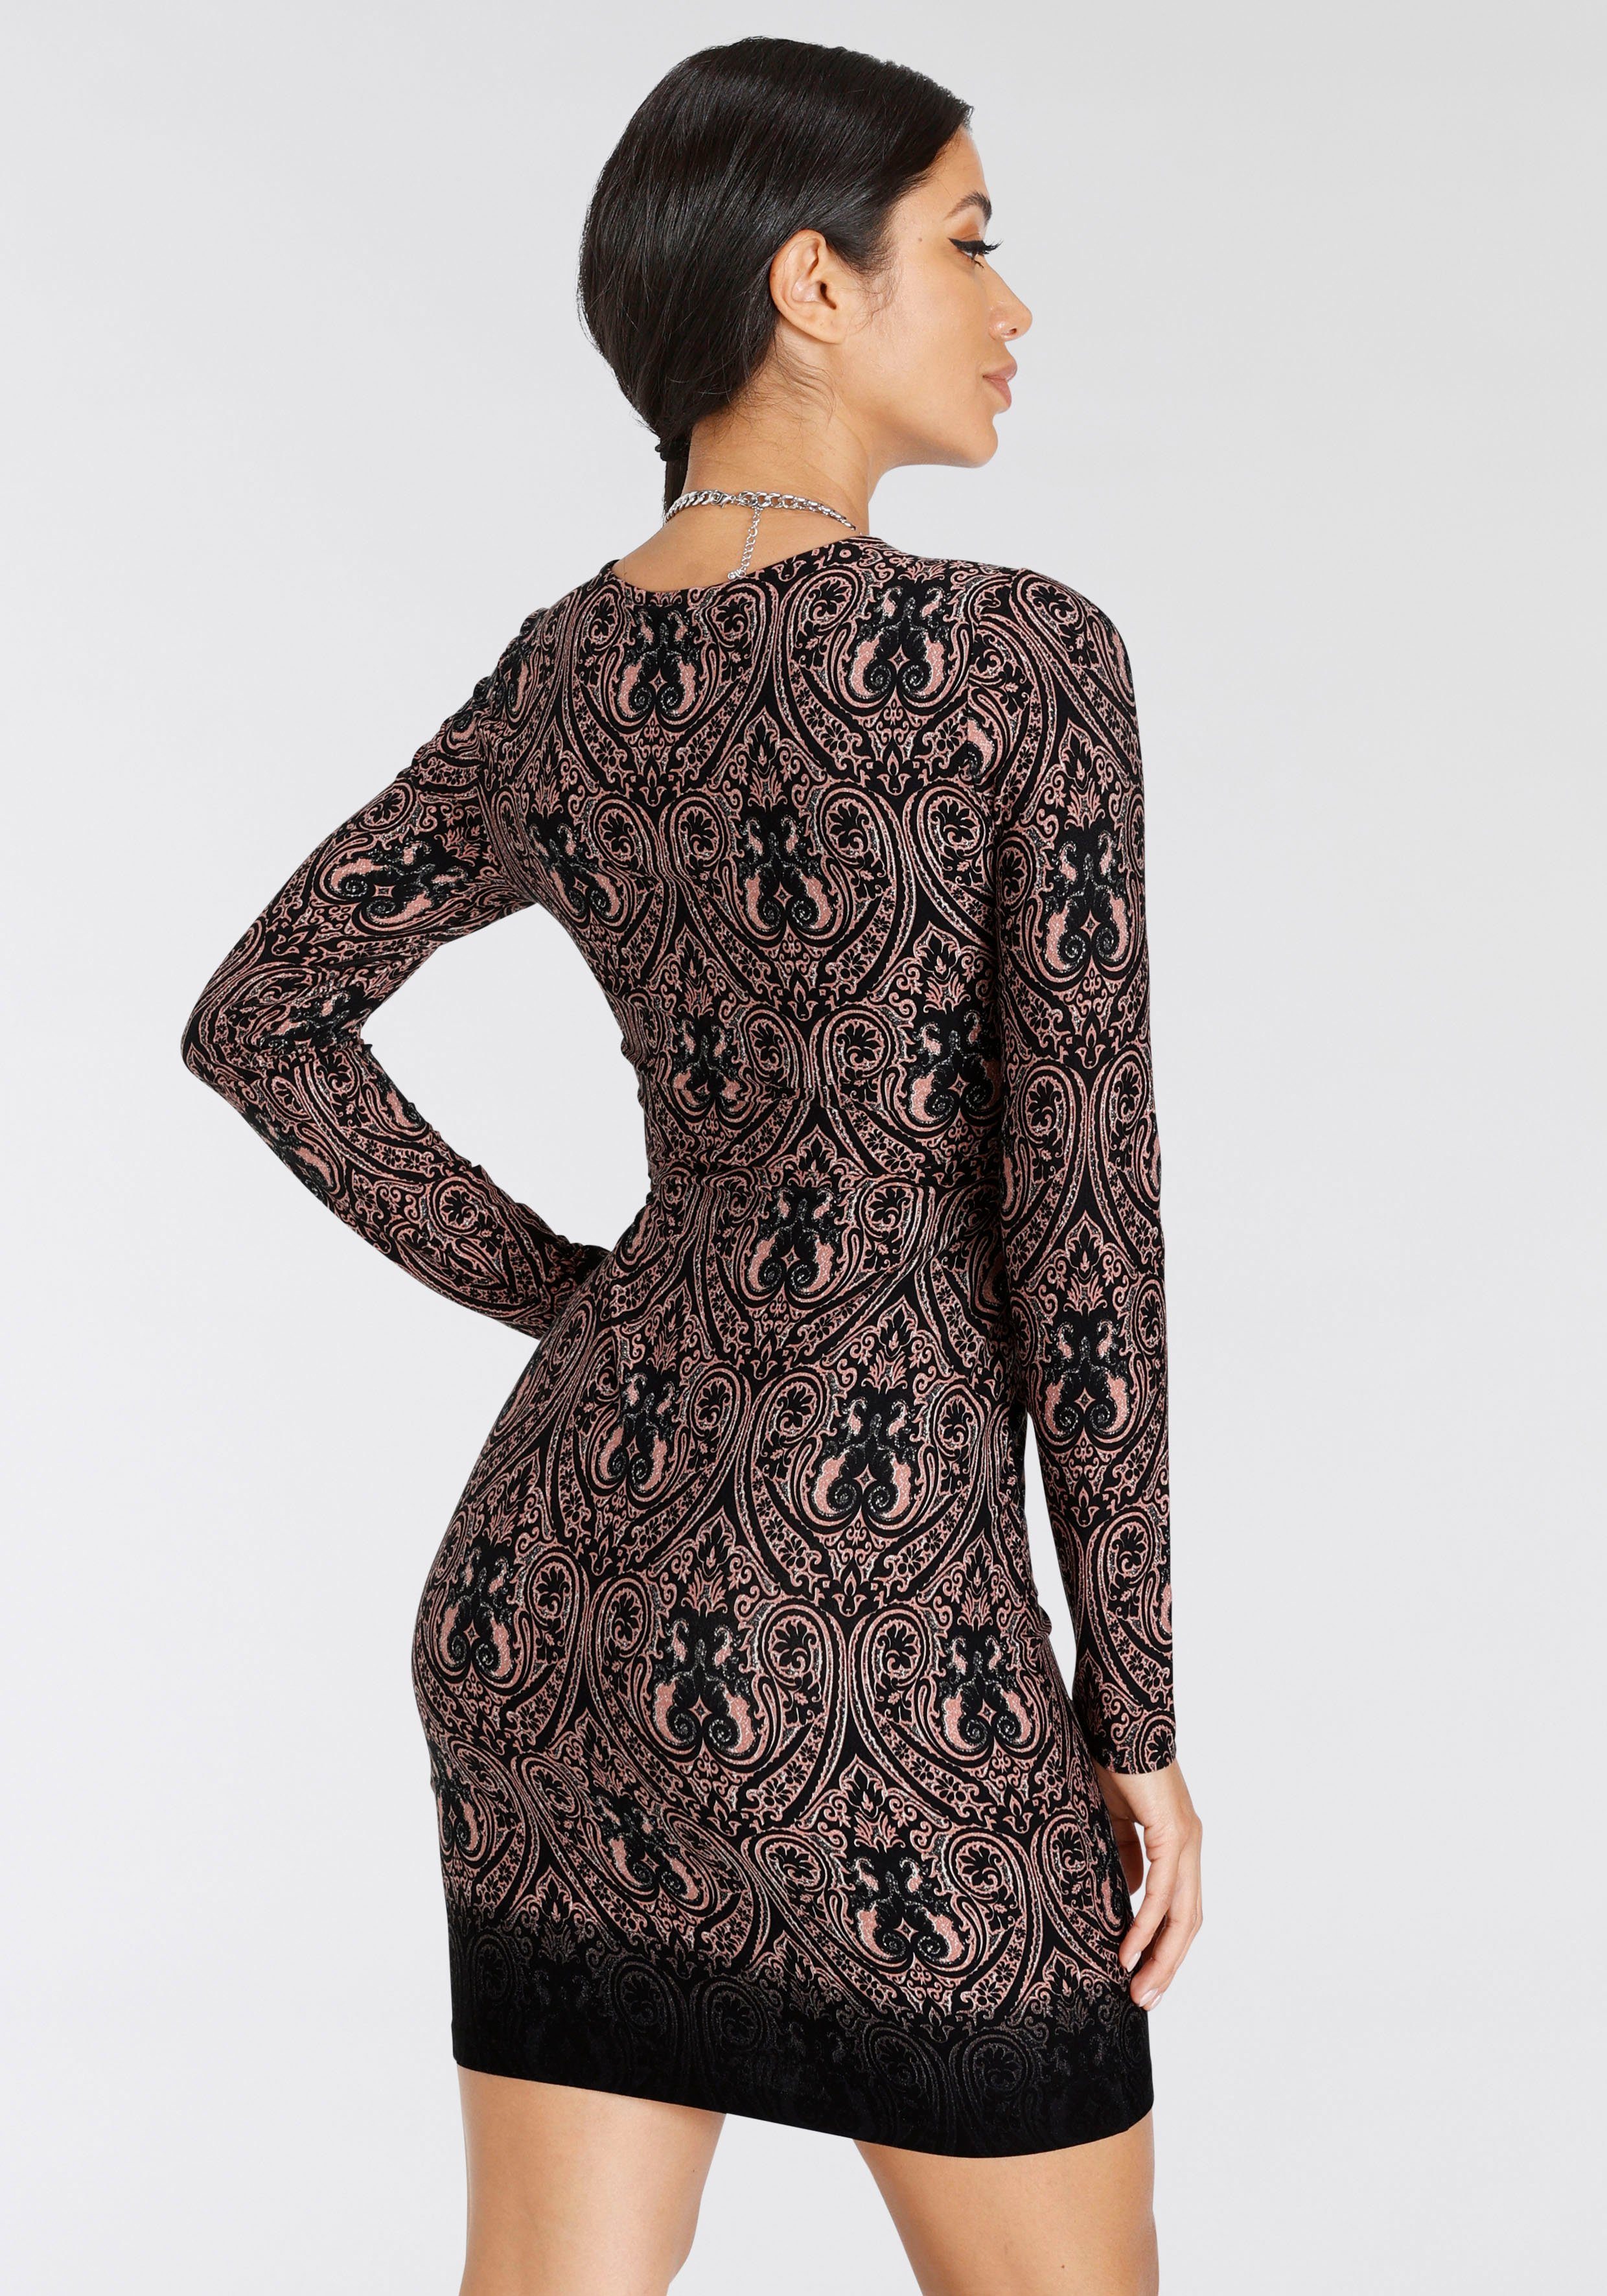 Melrose Jerseykleid mit Cut-Out und Paisley-Muster